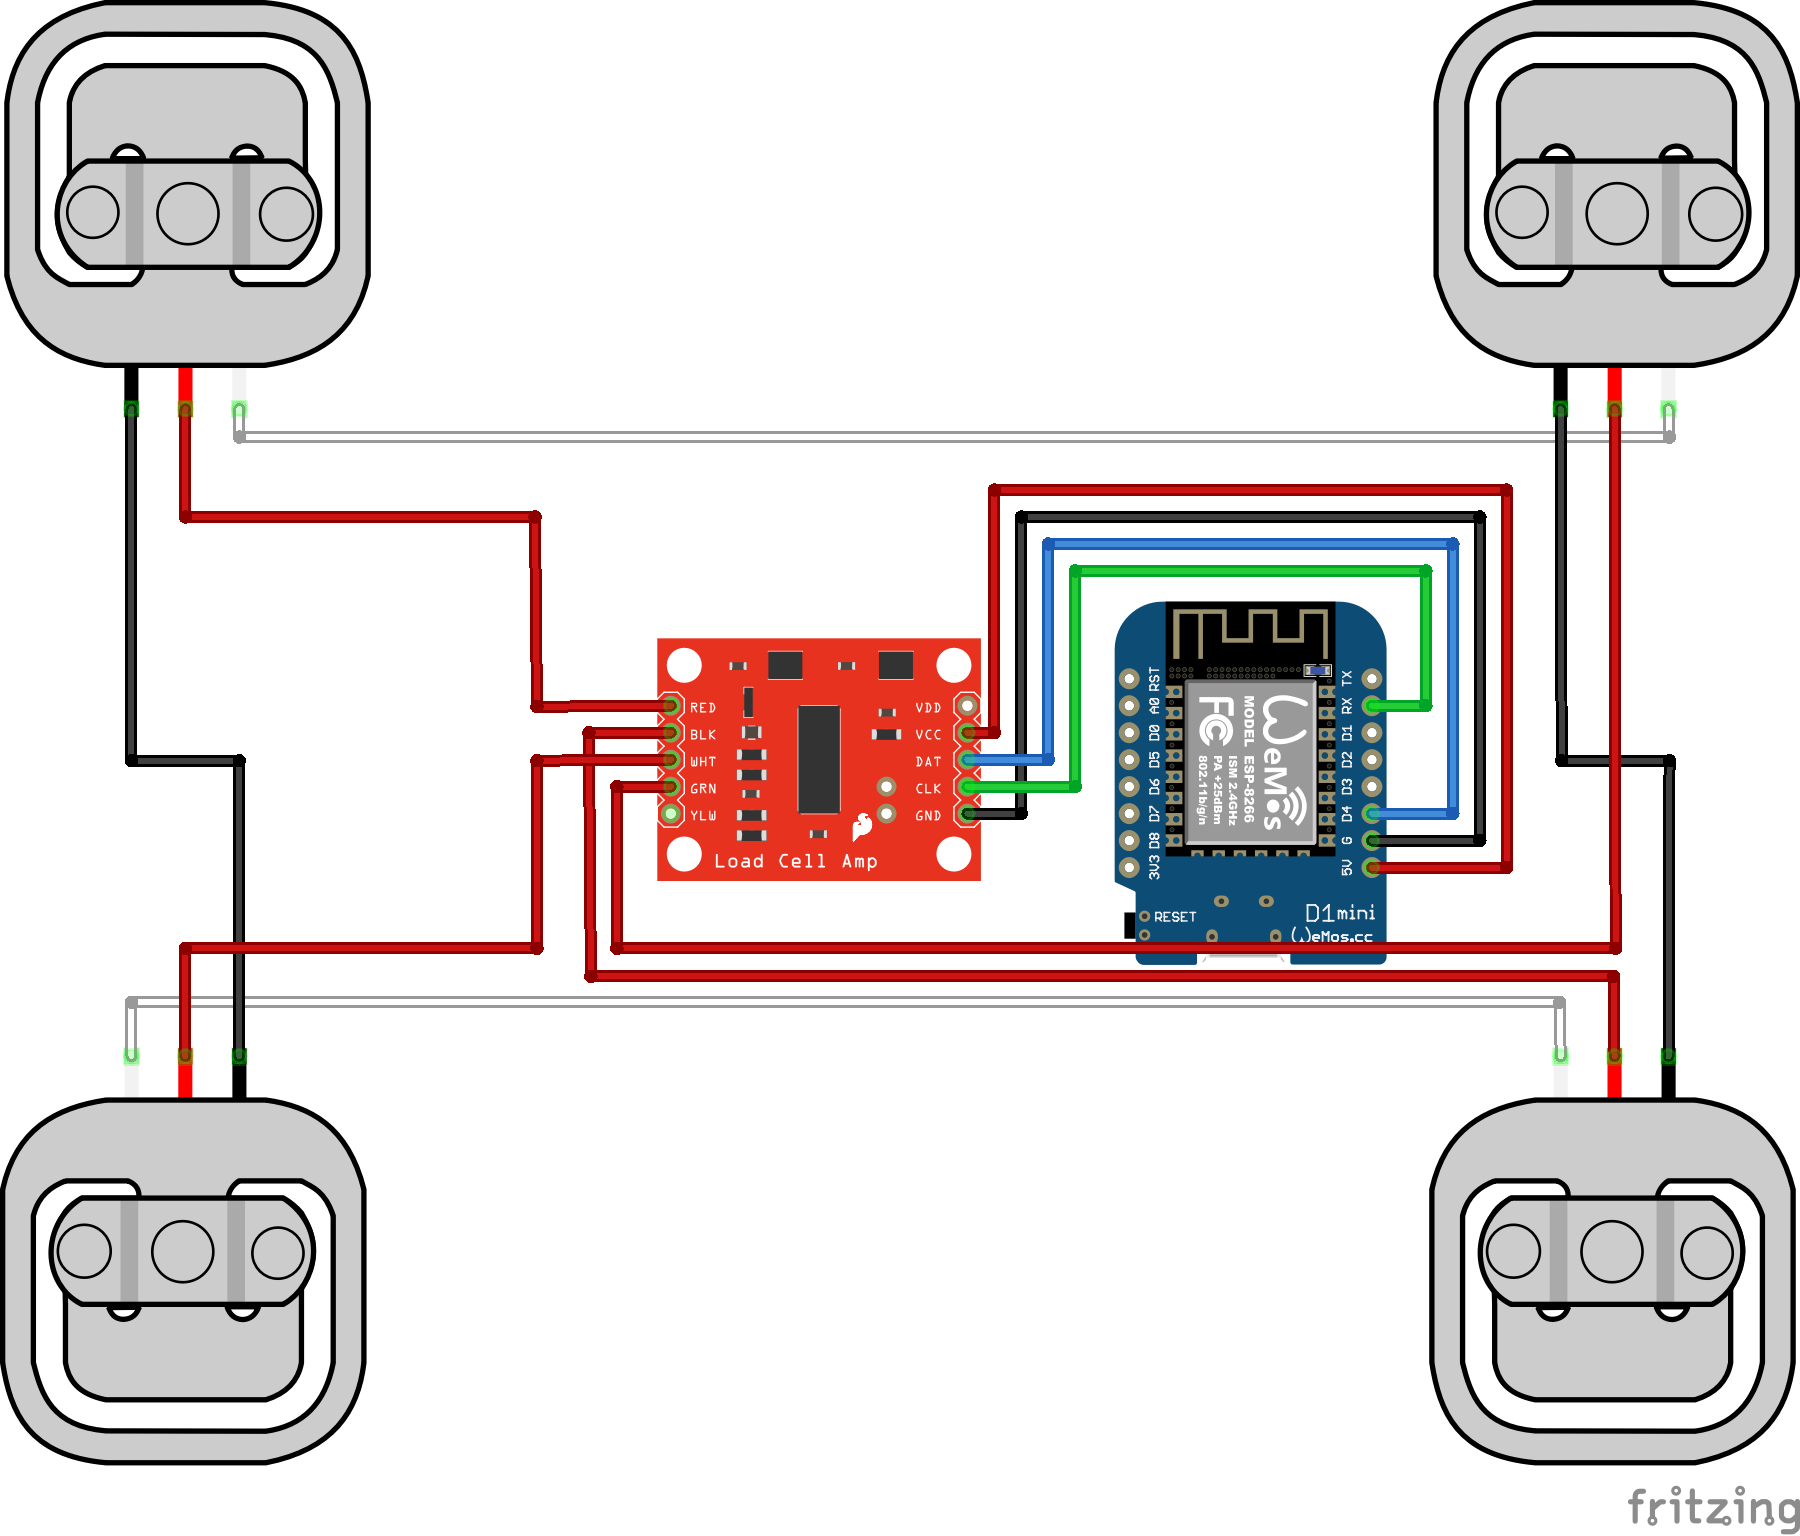 Wiring diagram for 3 wire load cell, HX711 and ESP8266 Wemos D1 Mini